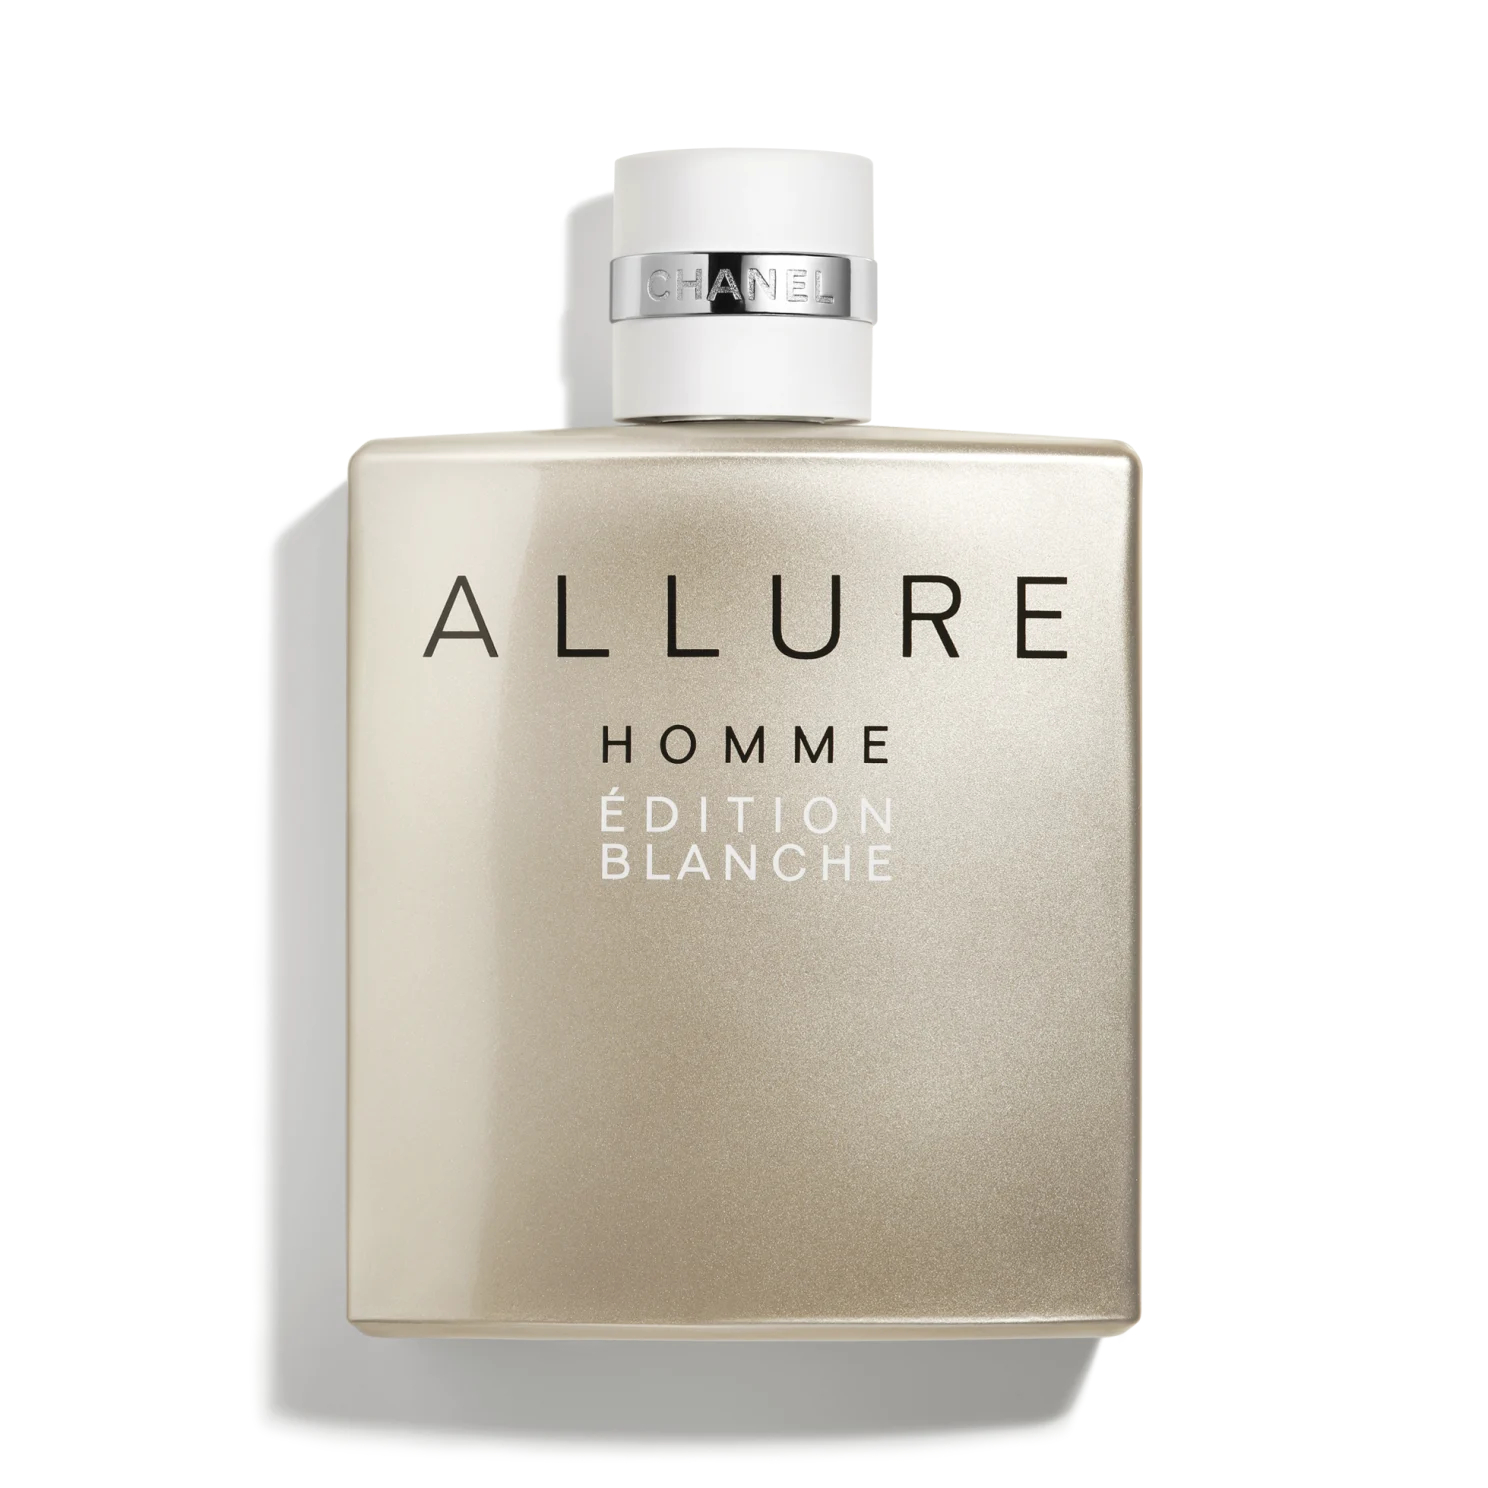 Вода парфюмерная Chanel Allure Homme Edition Blanche мужская, 150 мл blanche limited edition 2021